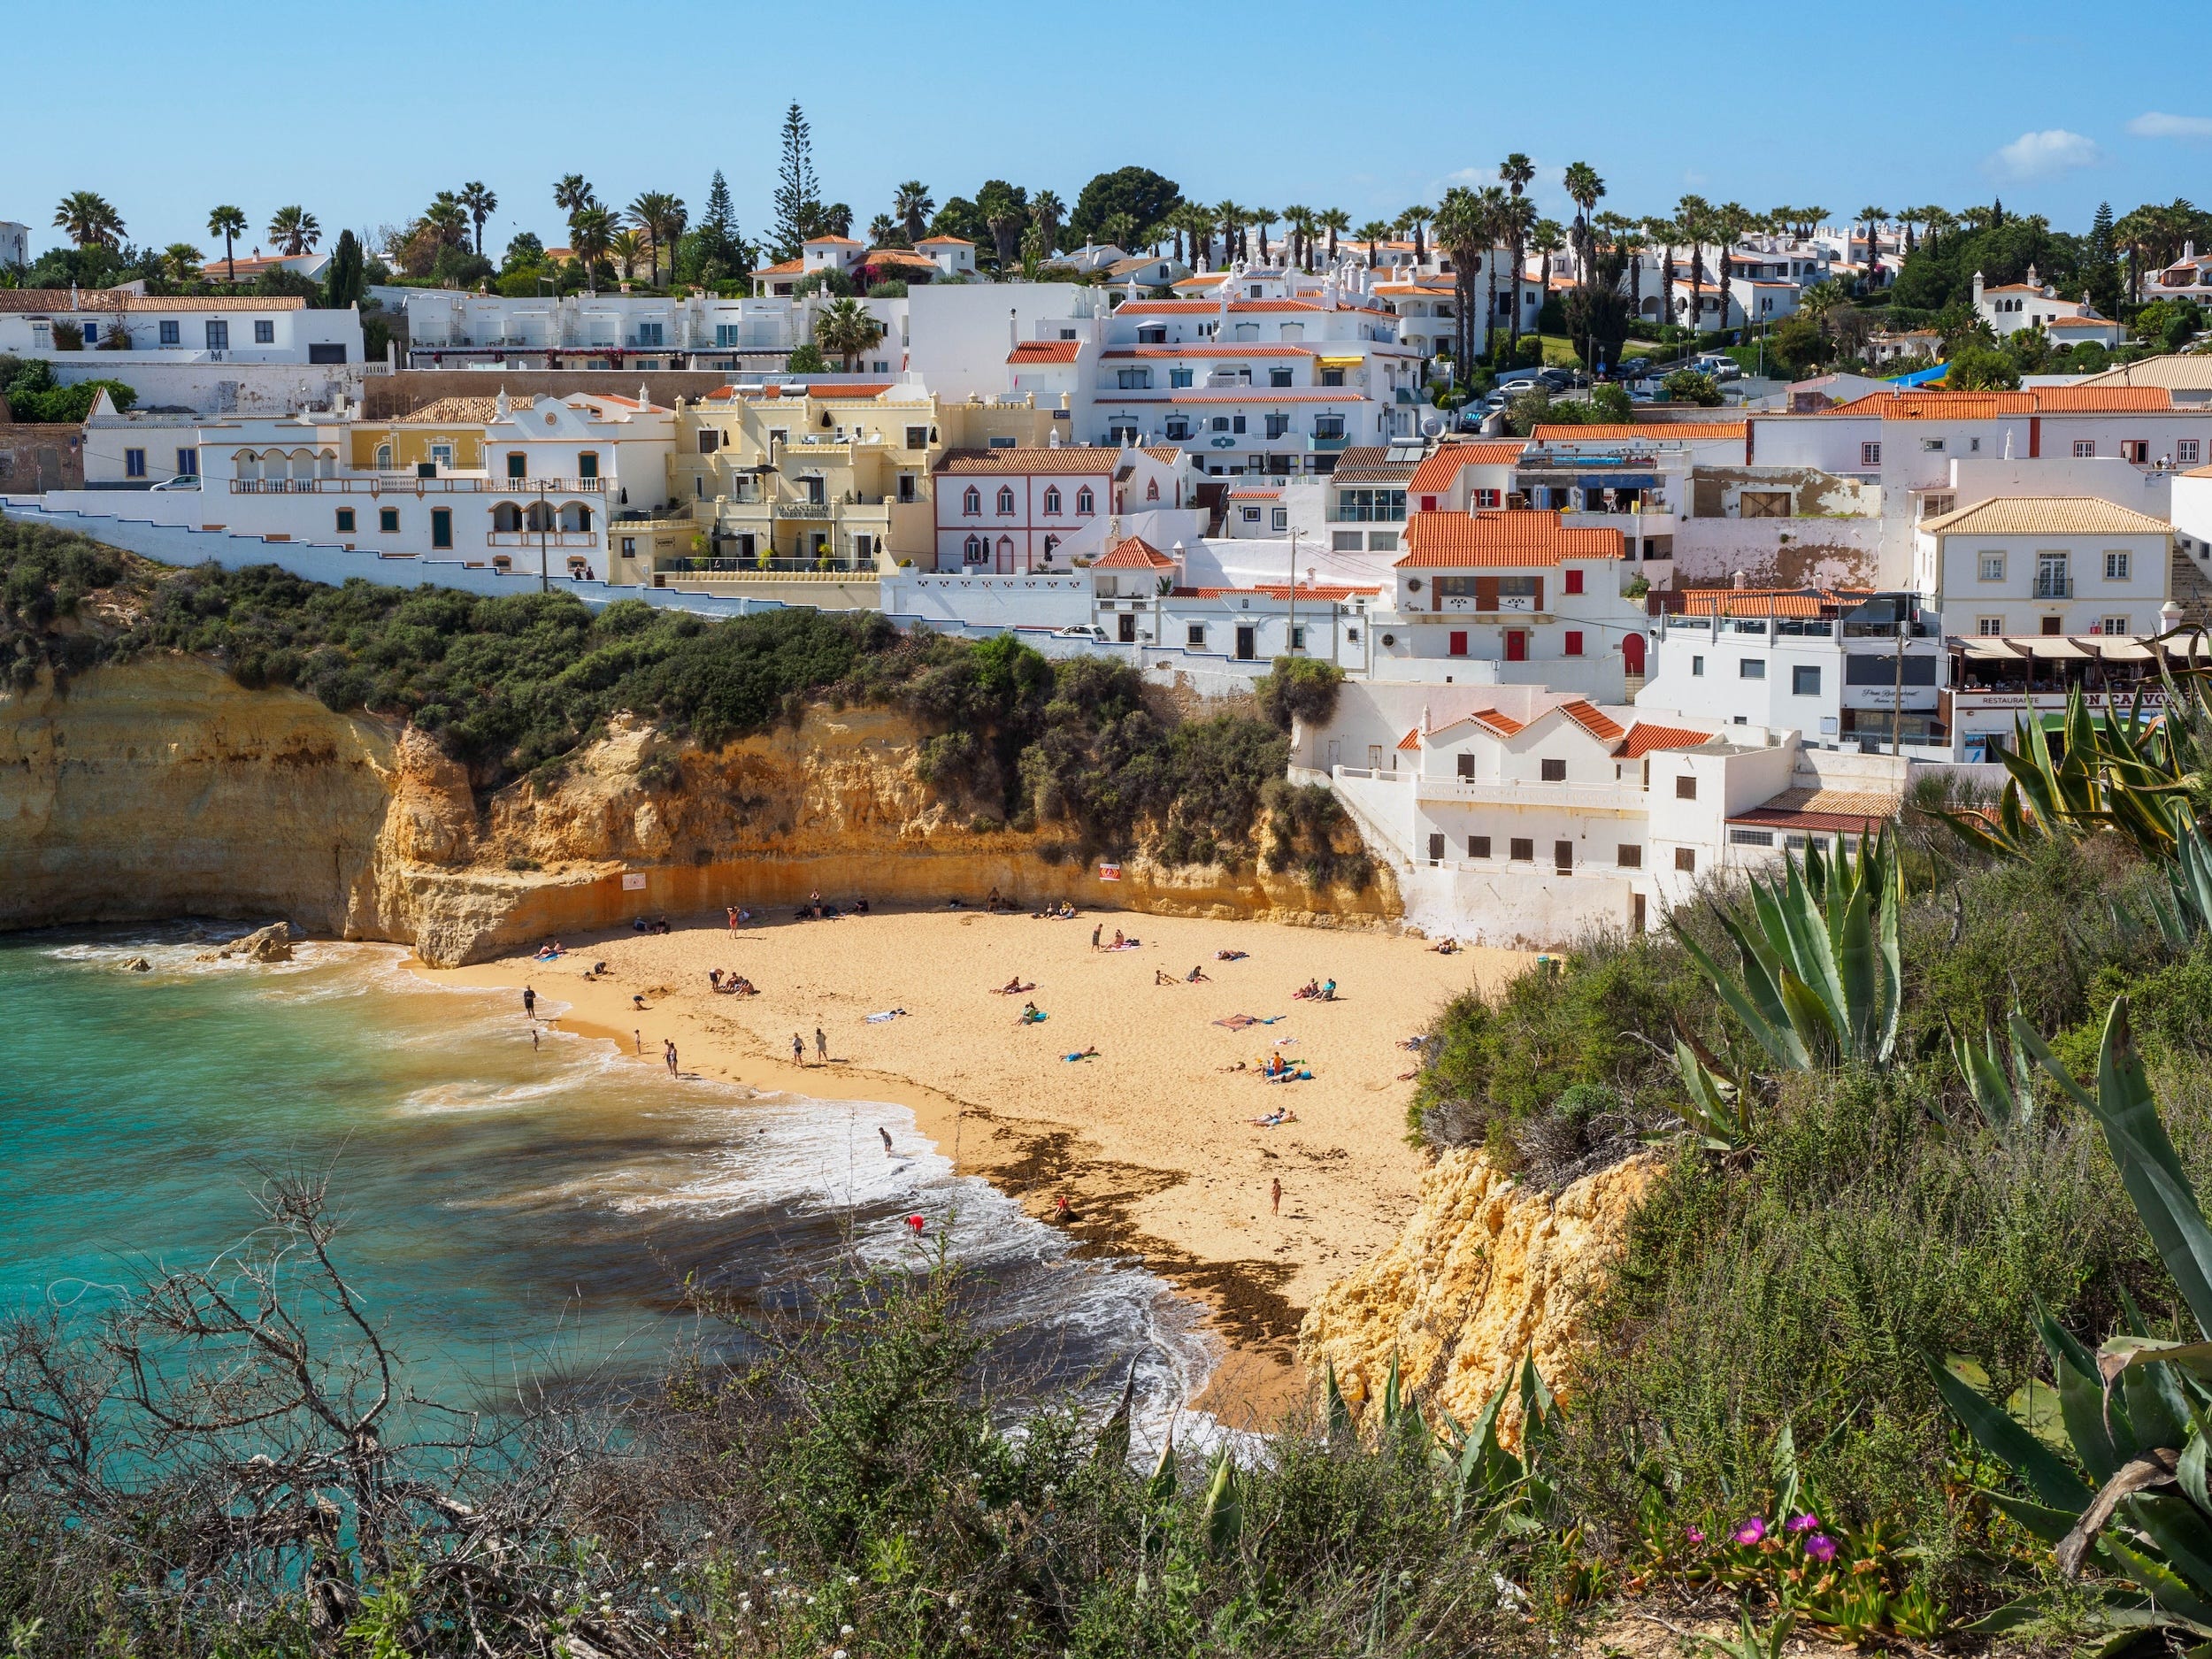 microsoft, i moved from florida to southern portugal. the weather is better, and the culture is amazing.